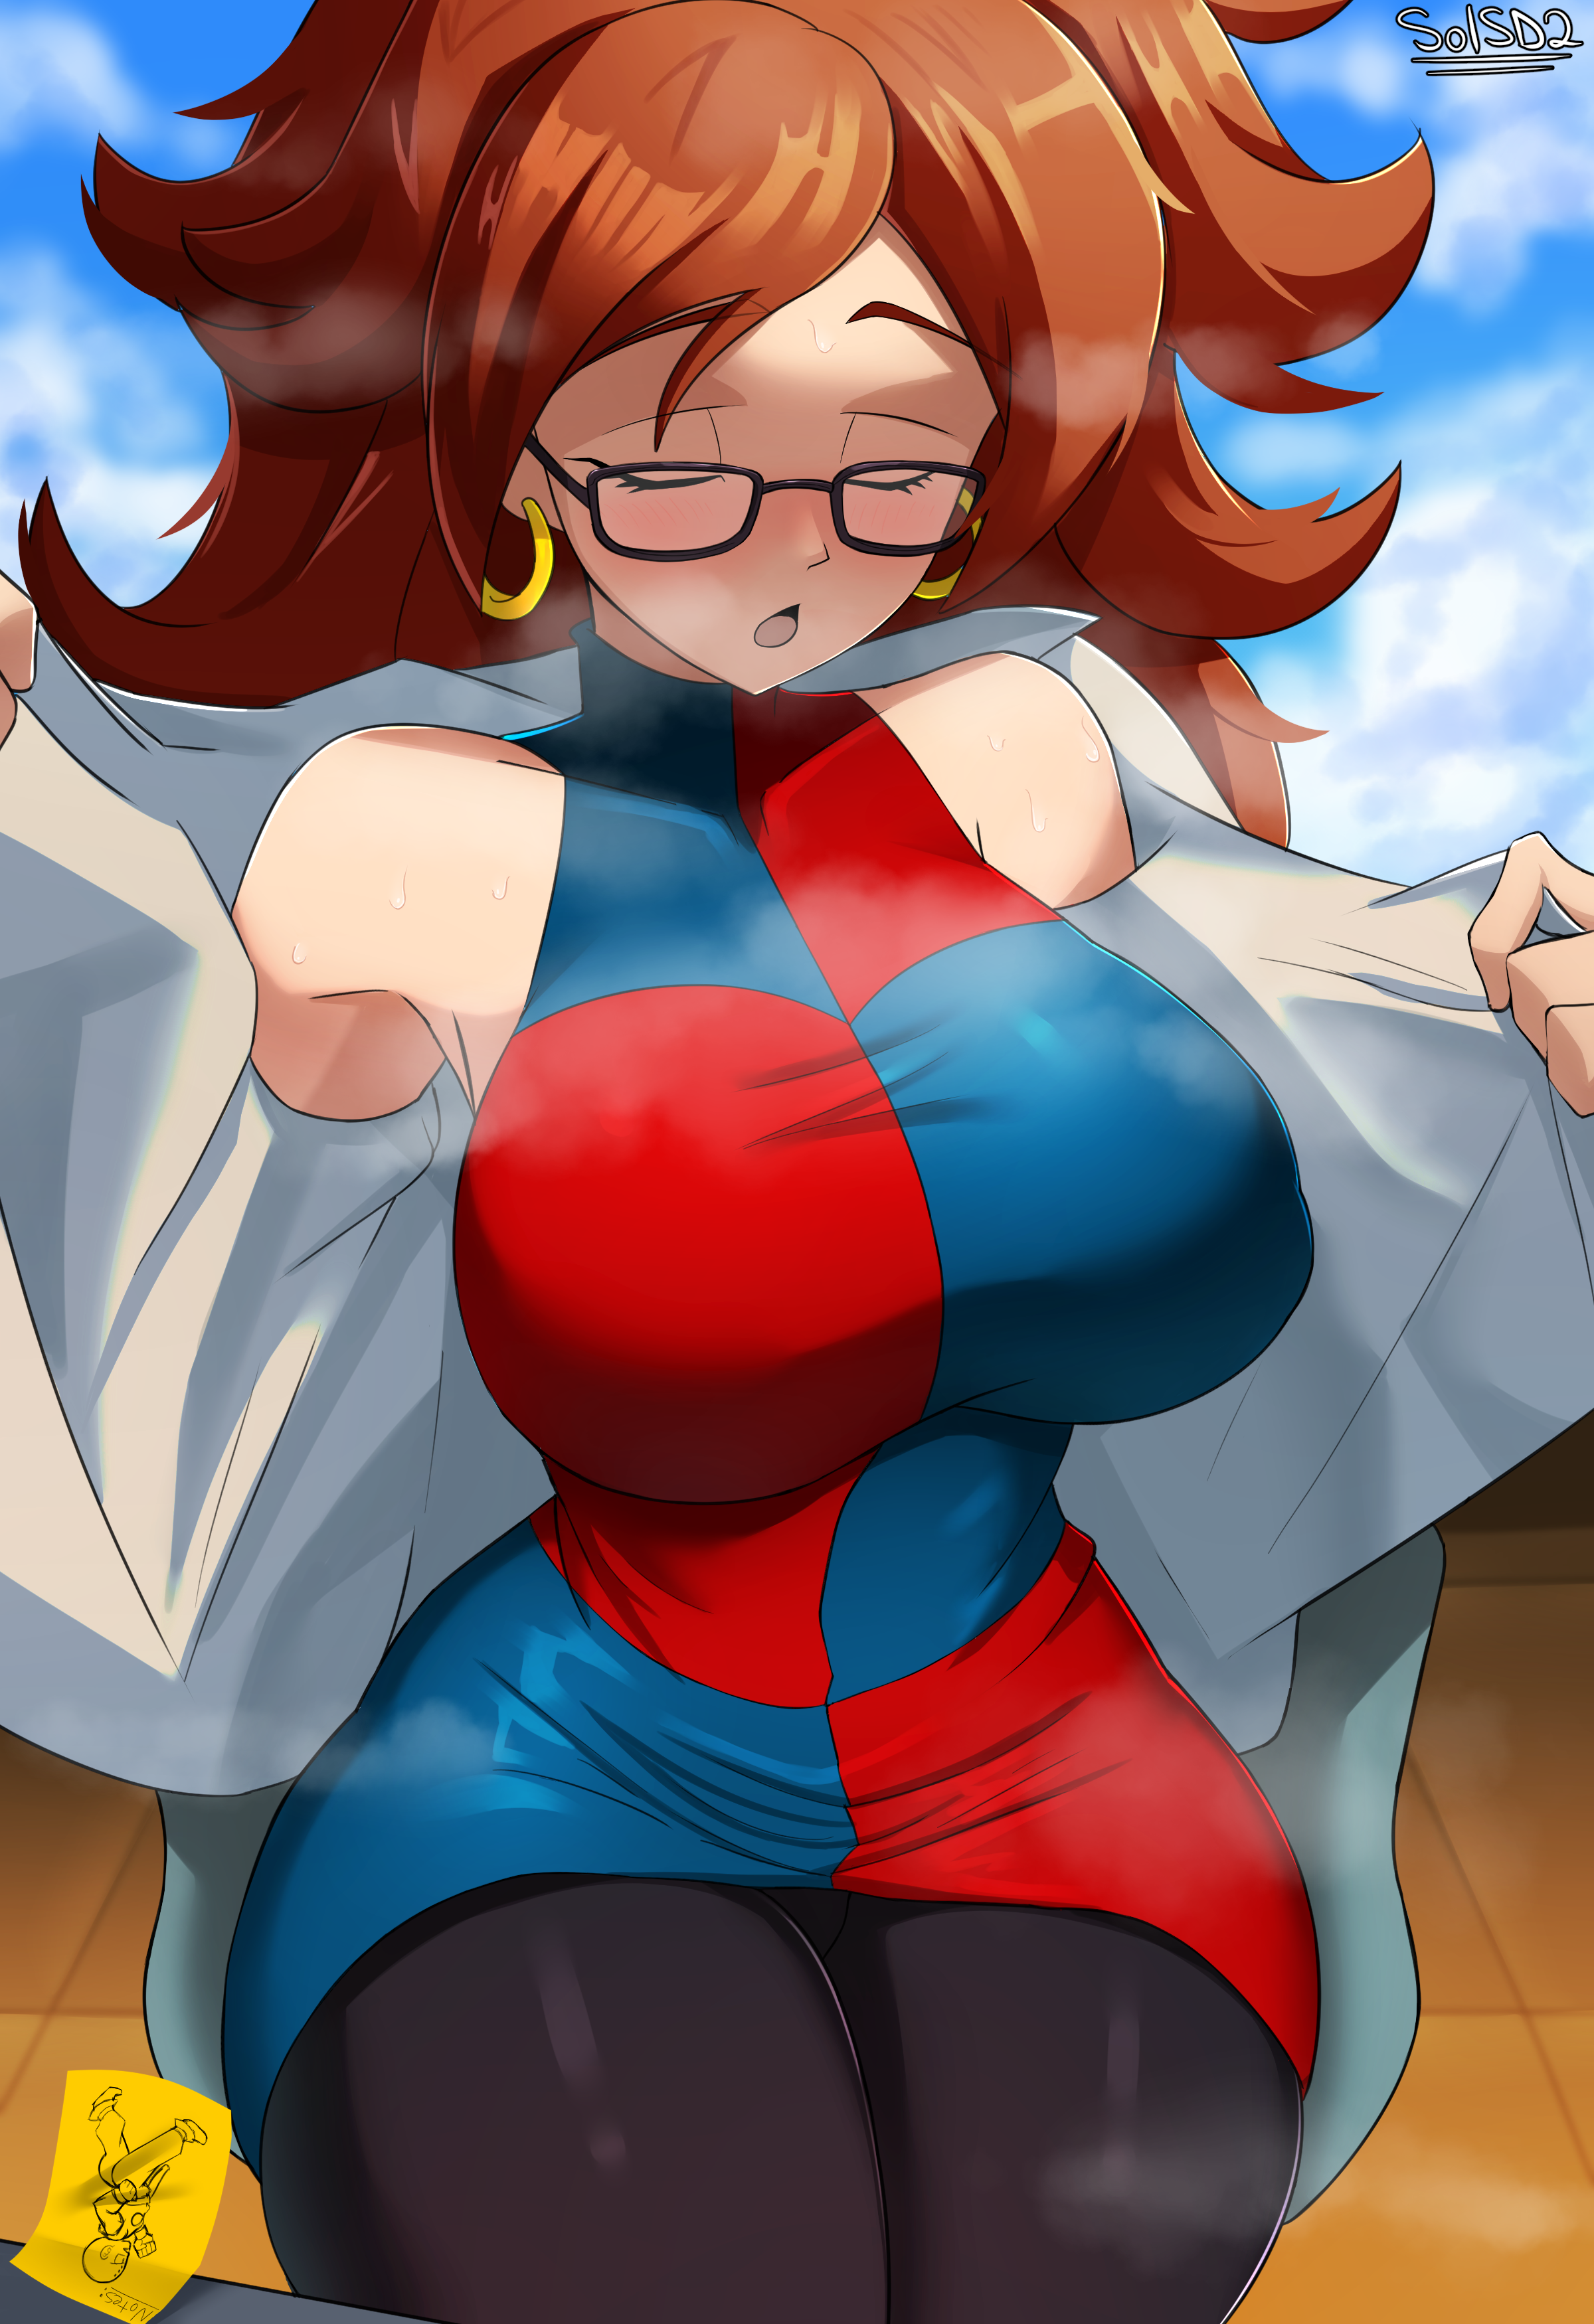 bernadine johnson recommends Android 21 Sexy